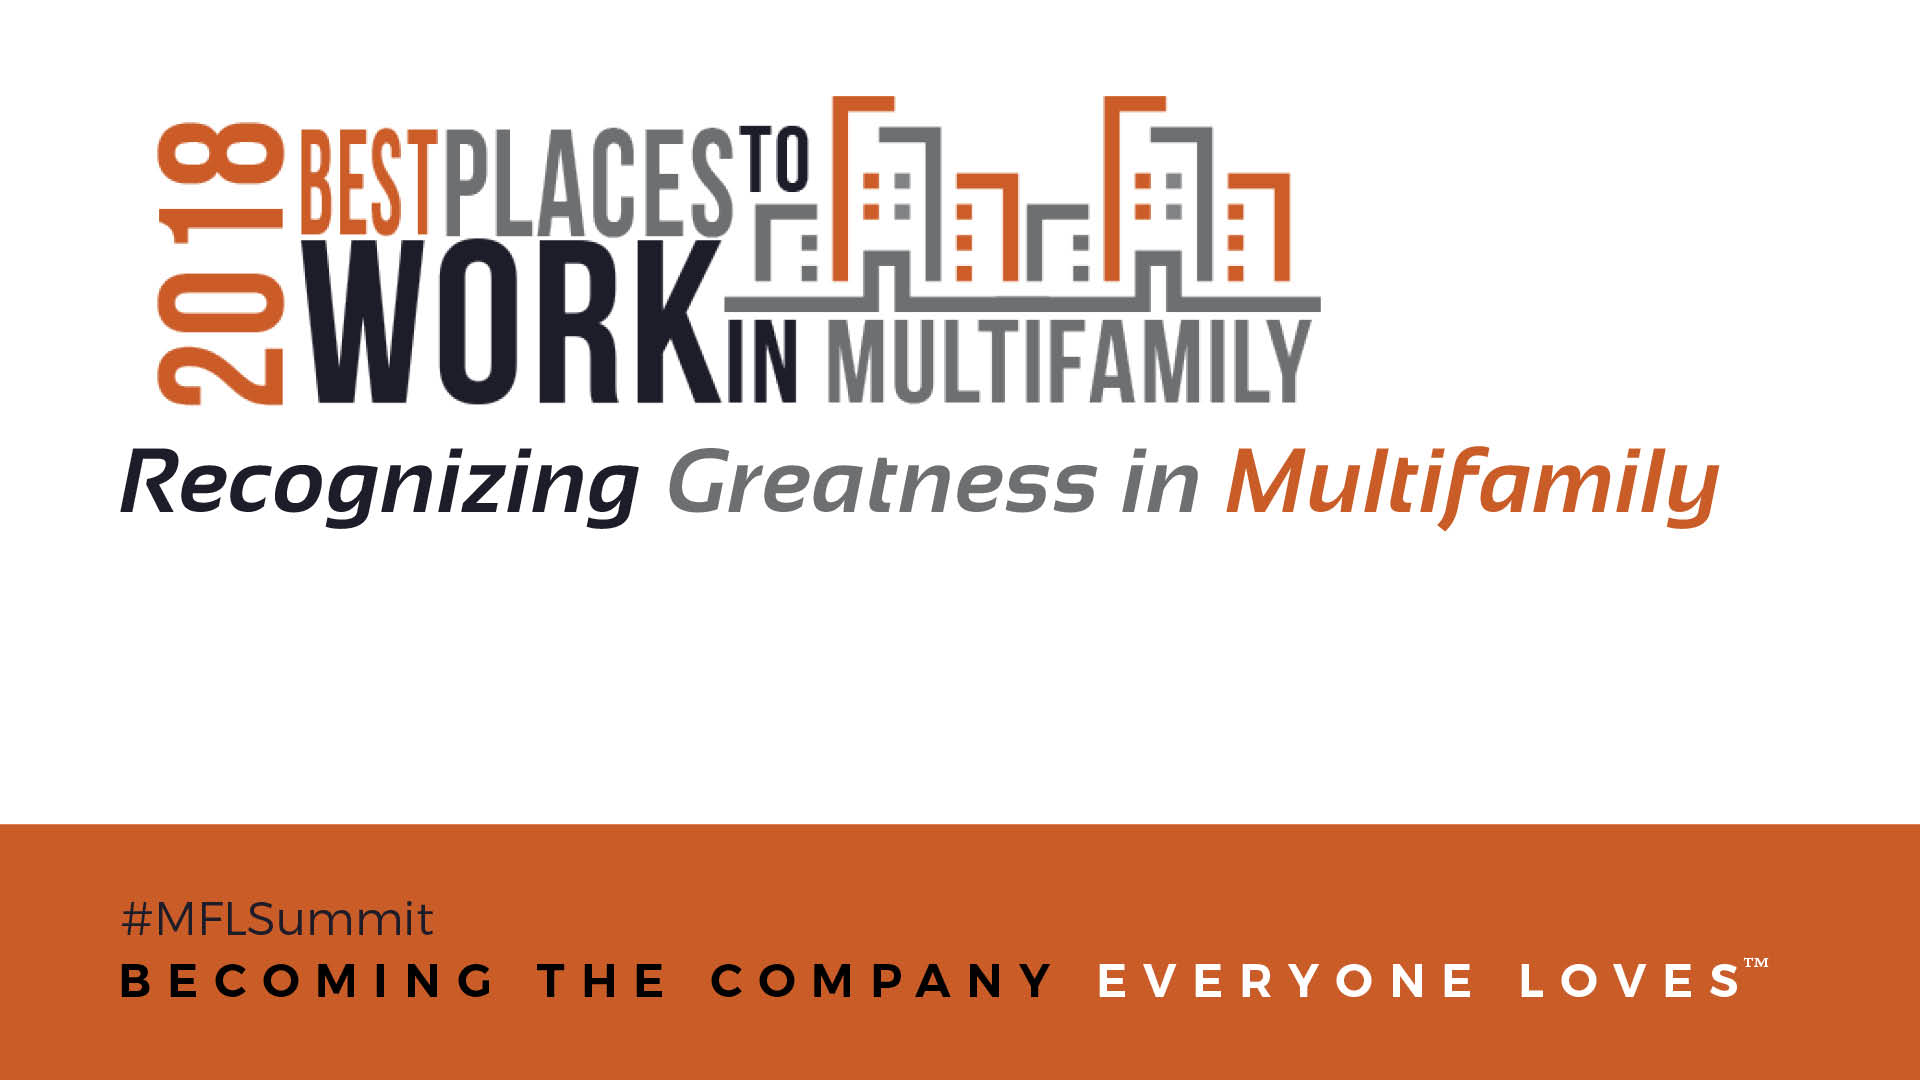 National 2018 Best Places to Work Multifamily® Rankings Announced